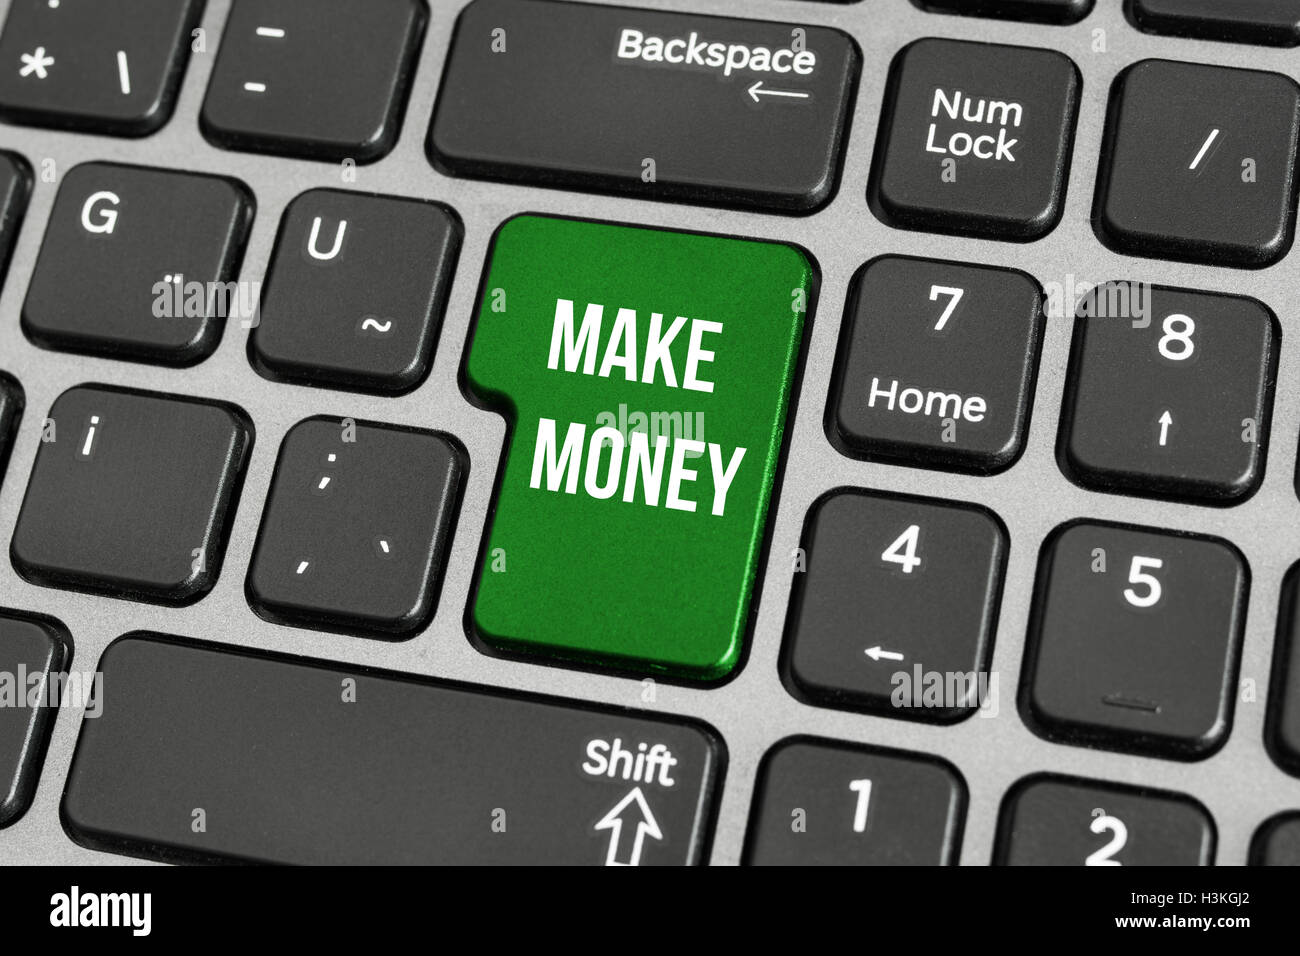 a concept of making money online, with message on enter key of keyboard. Stock Photo